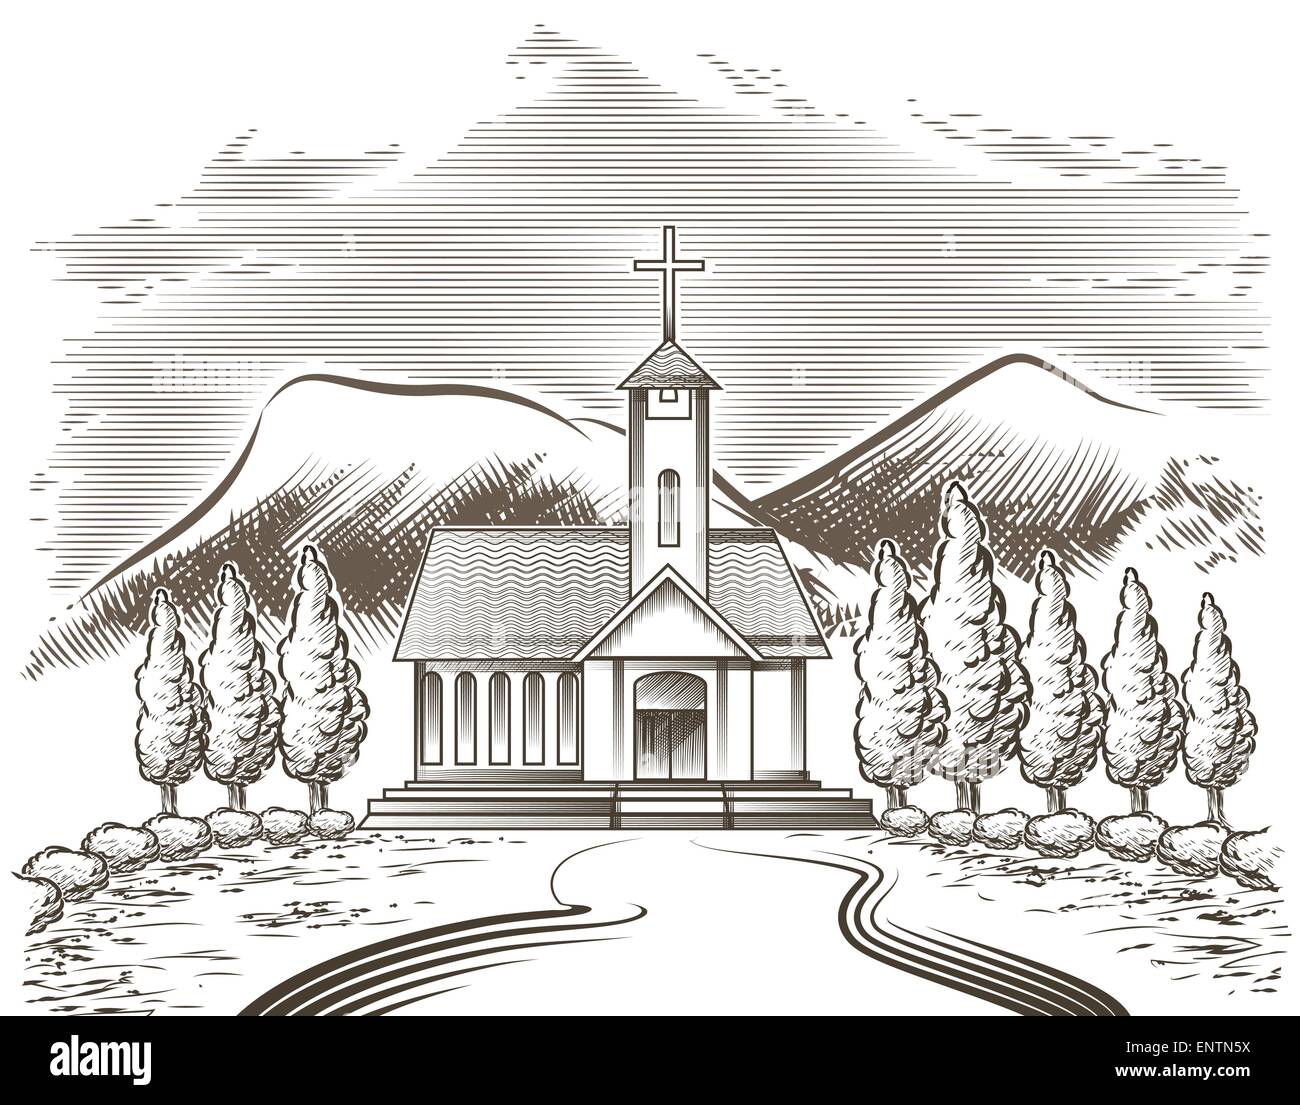 Illustration of church yard and village road against mountain landscape drawn in vintage engraving style Stock Vector